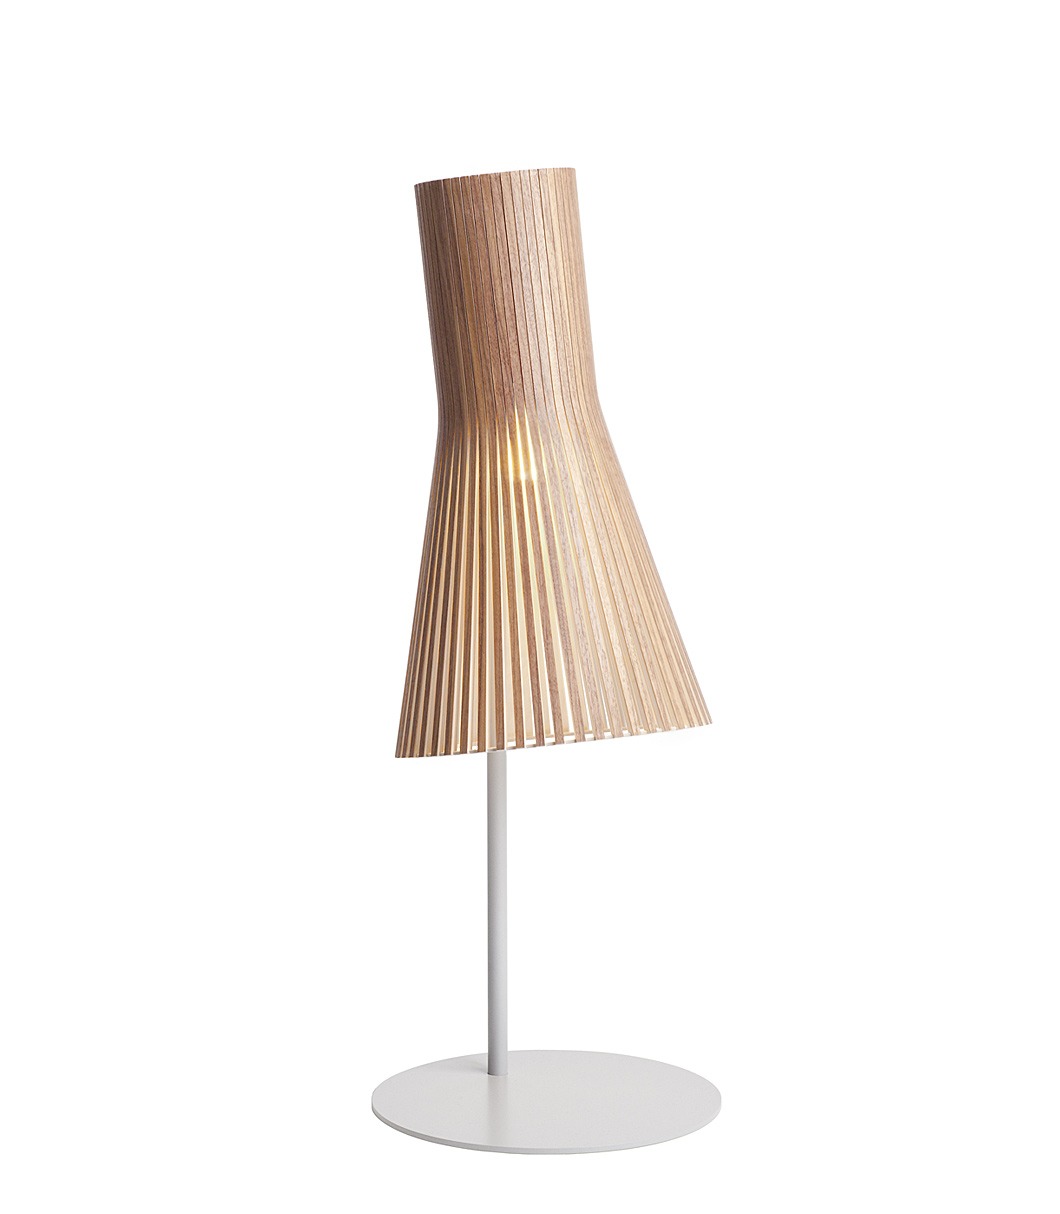 Secto 4220 table lamp is available in walnut veneer